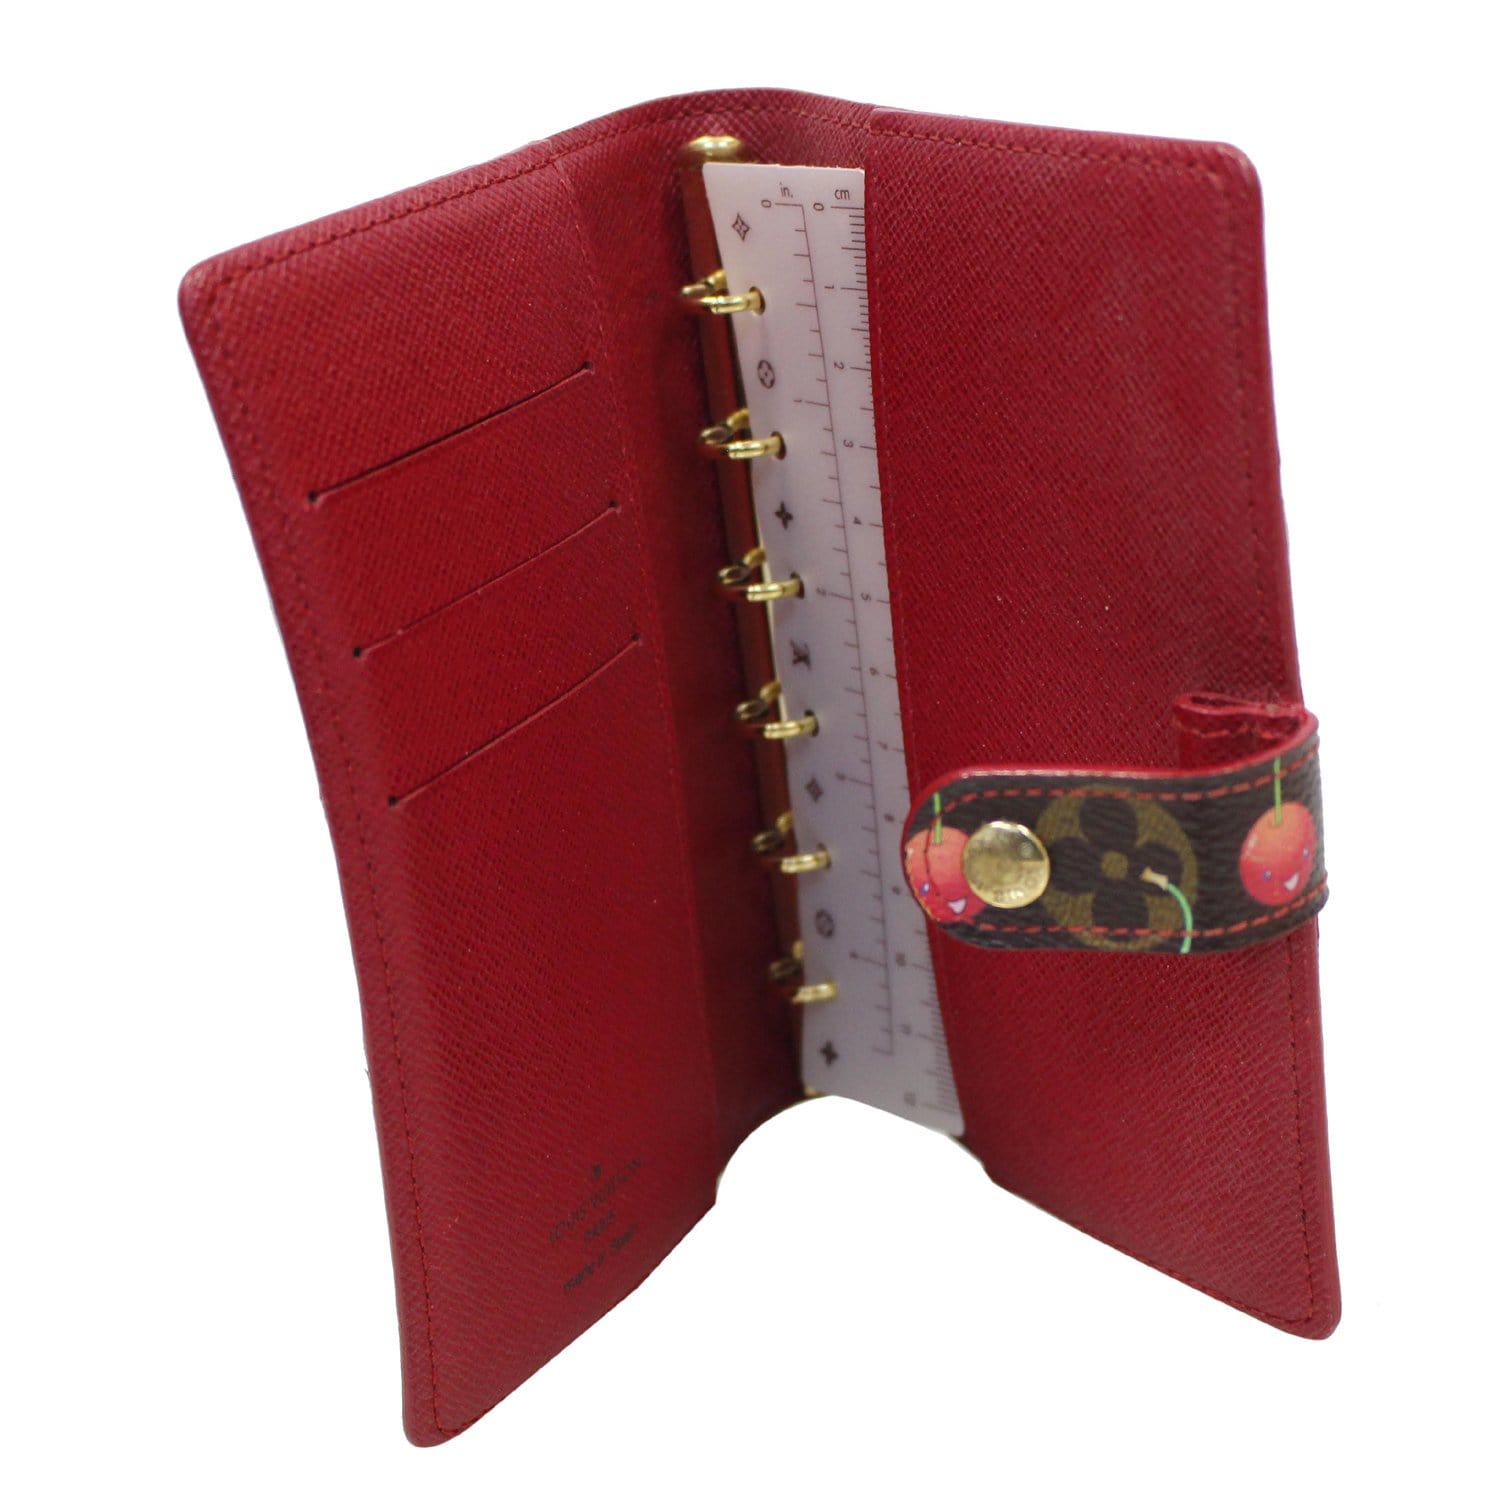 Authentic Louis Vuitton Red Epi Agenda PM notebook cover